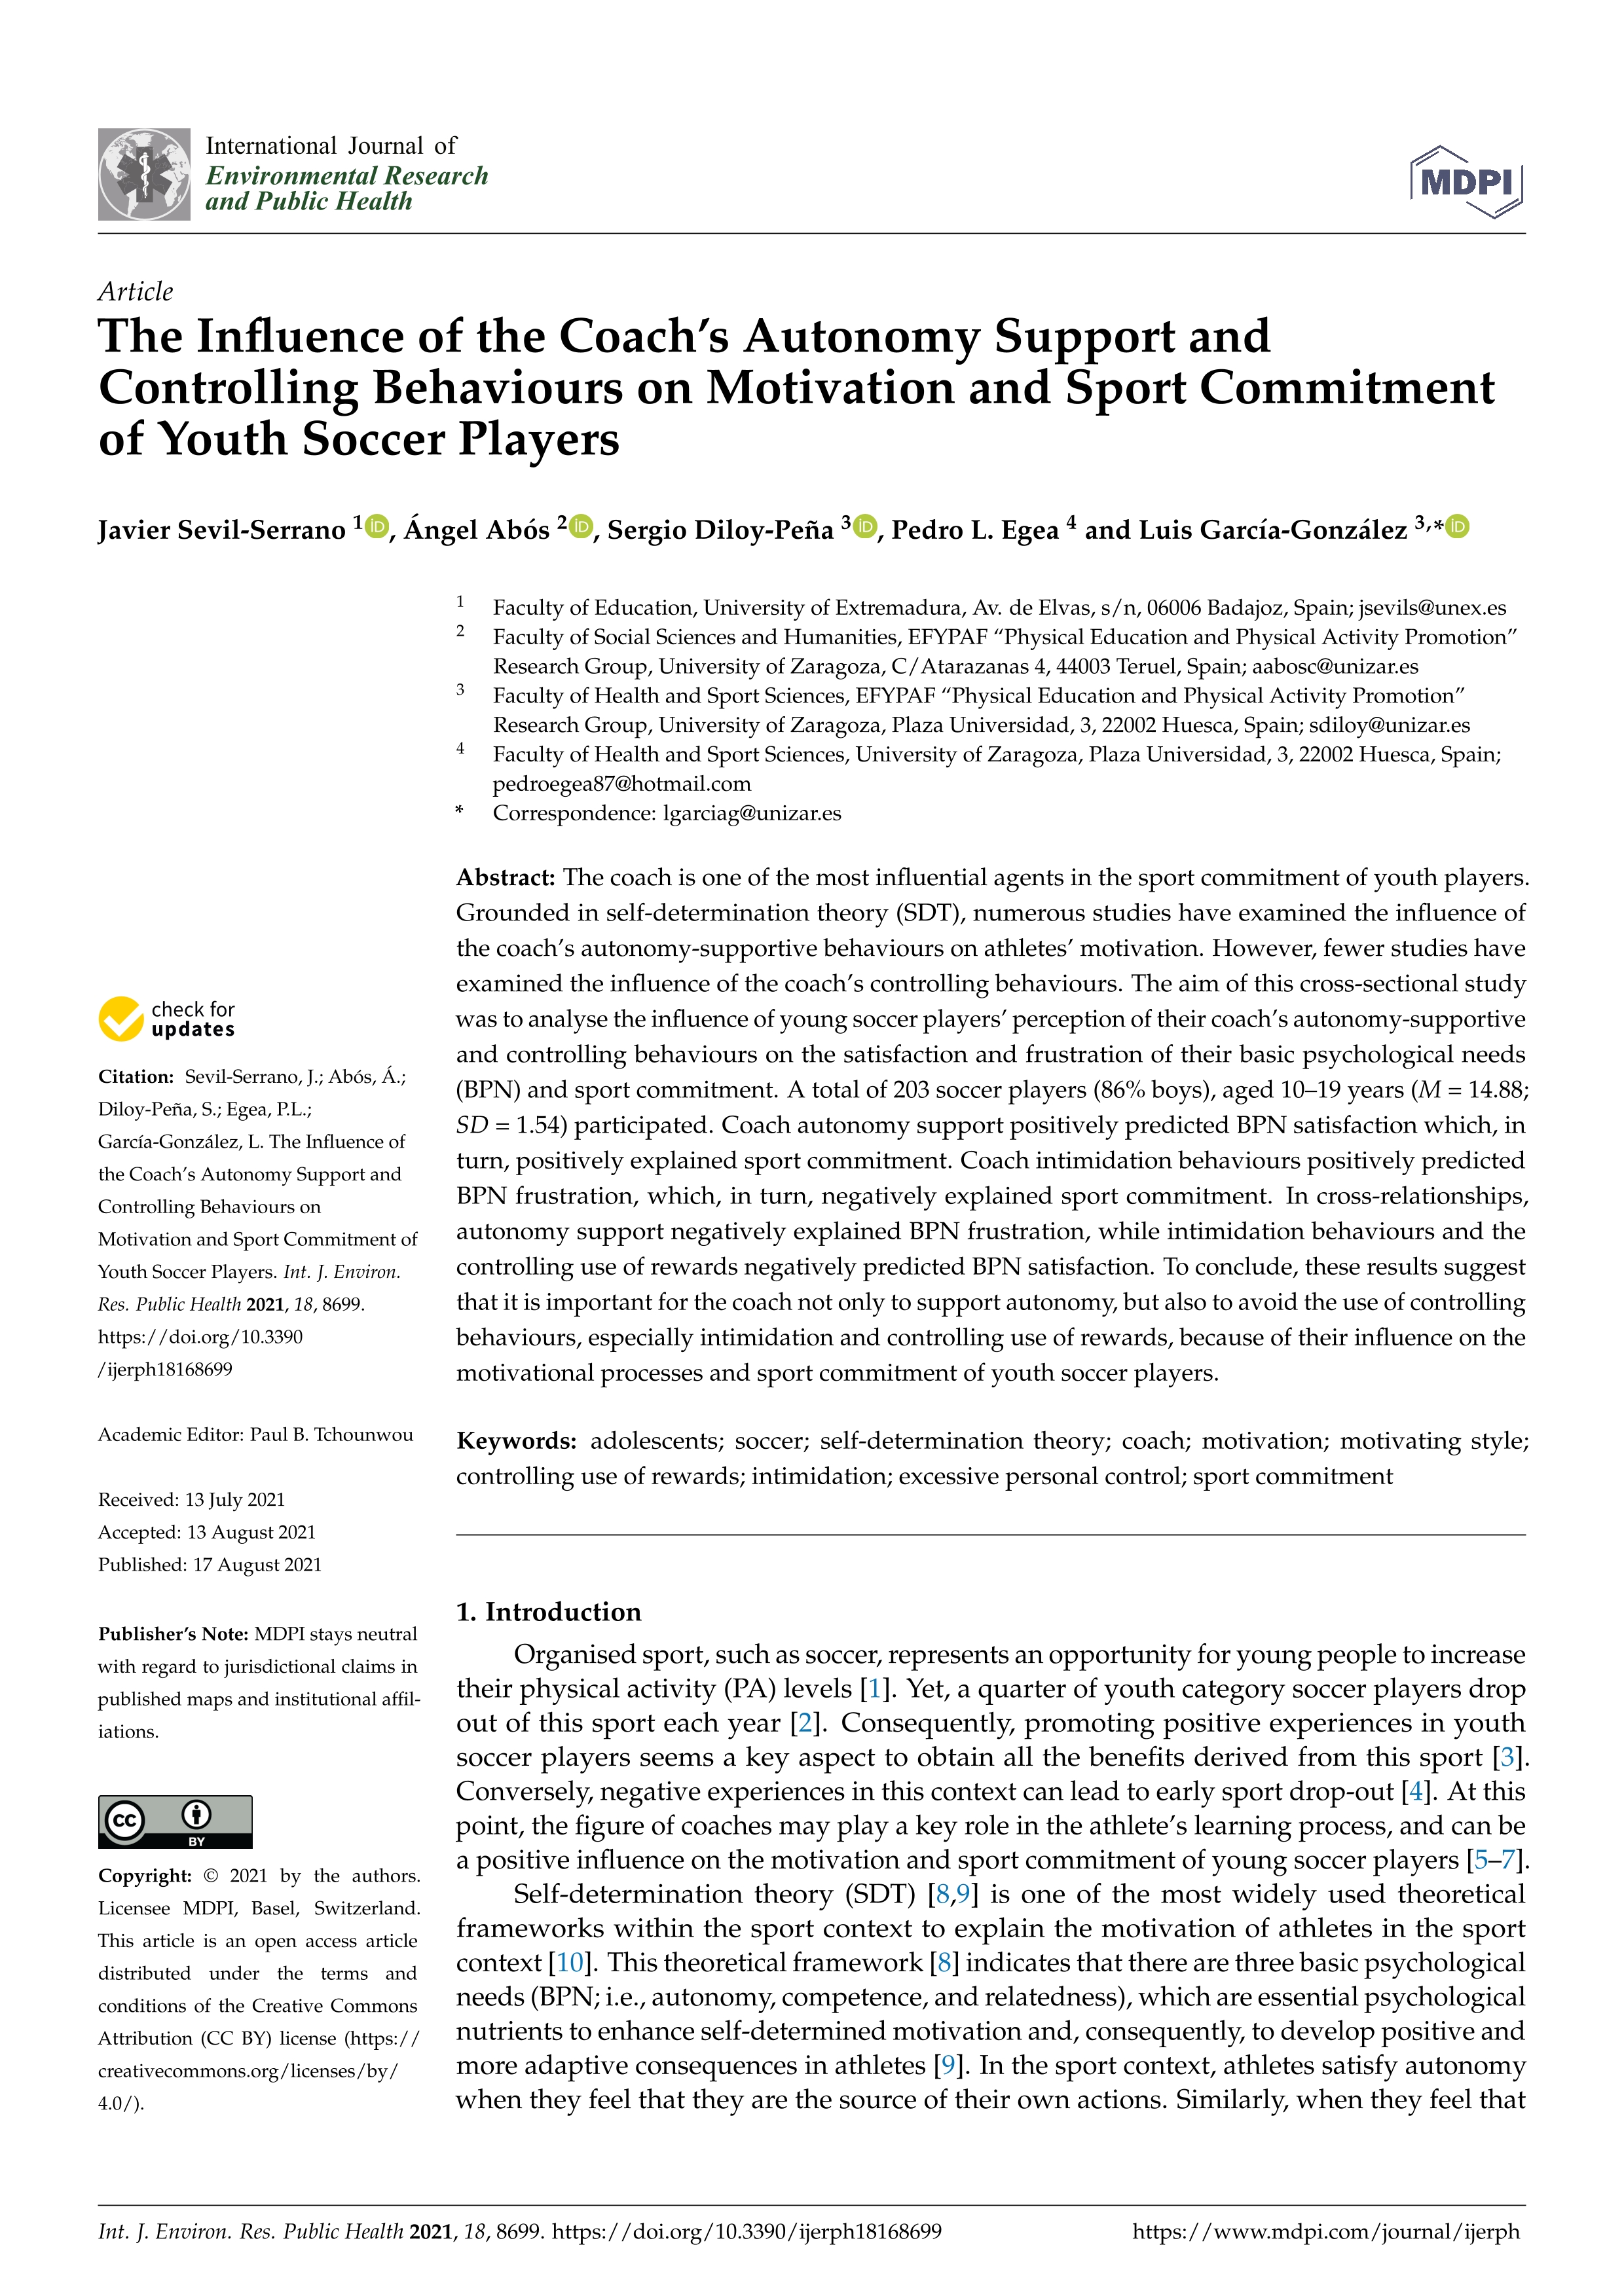 The Influence of the Coach’s Autonomy Support and Controlling Behaviours on Motivation and Sport Commitment of Youth Soccer Players